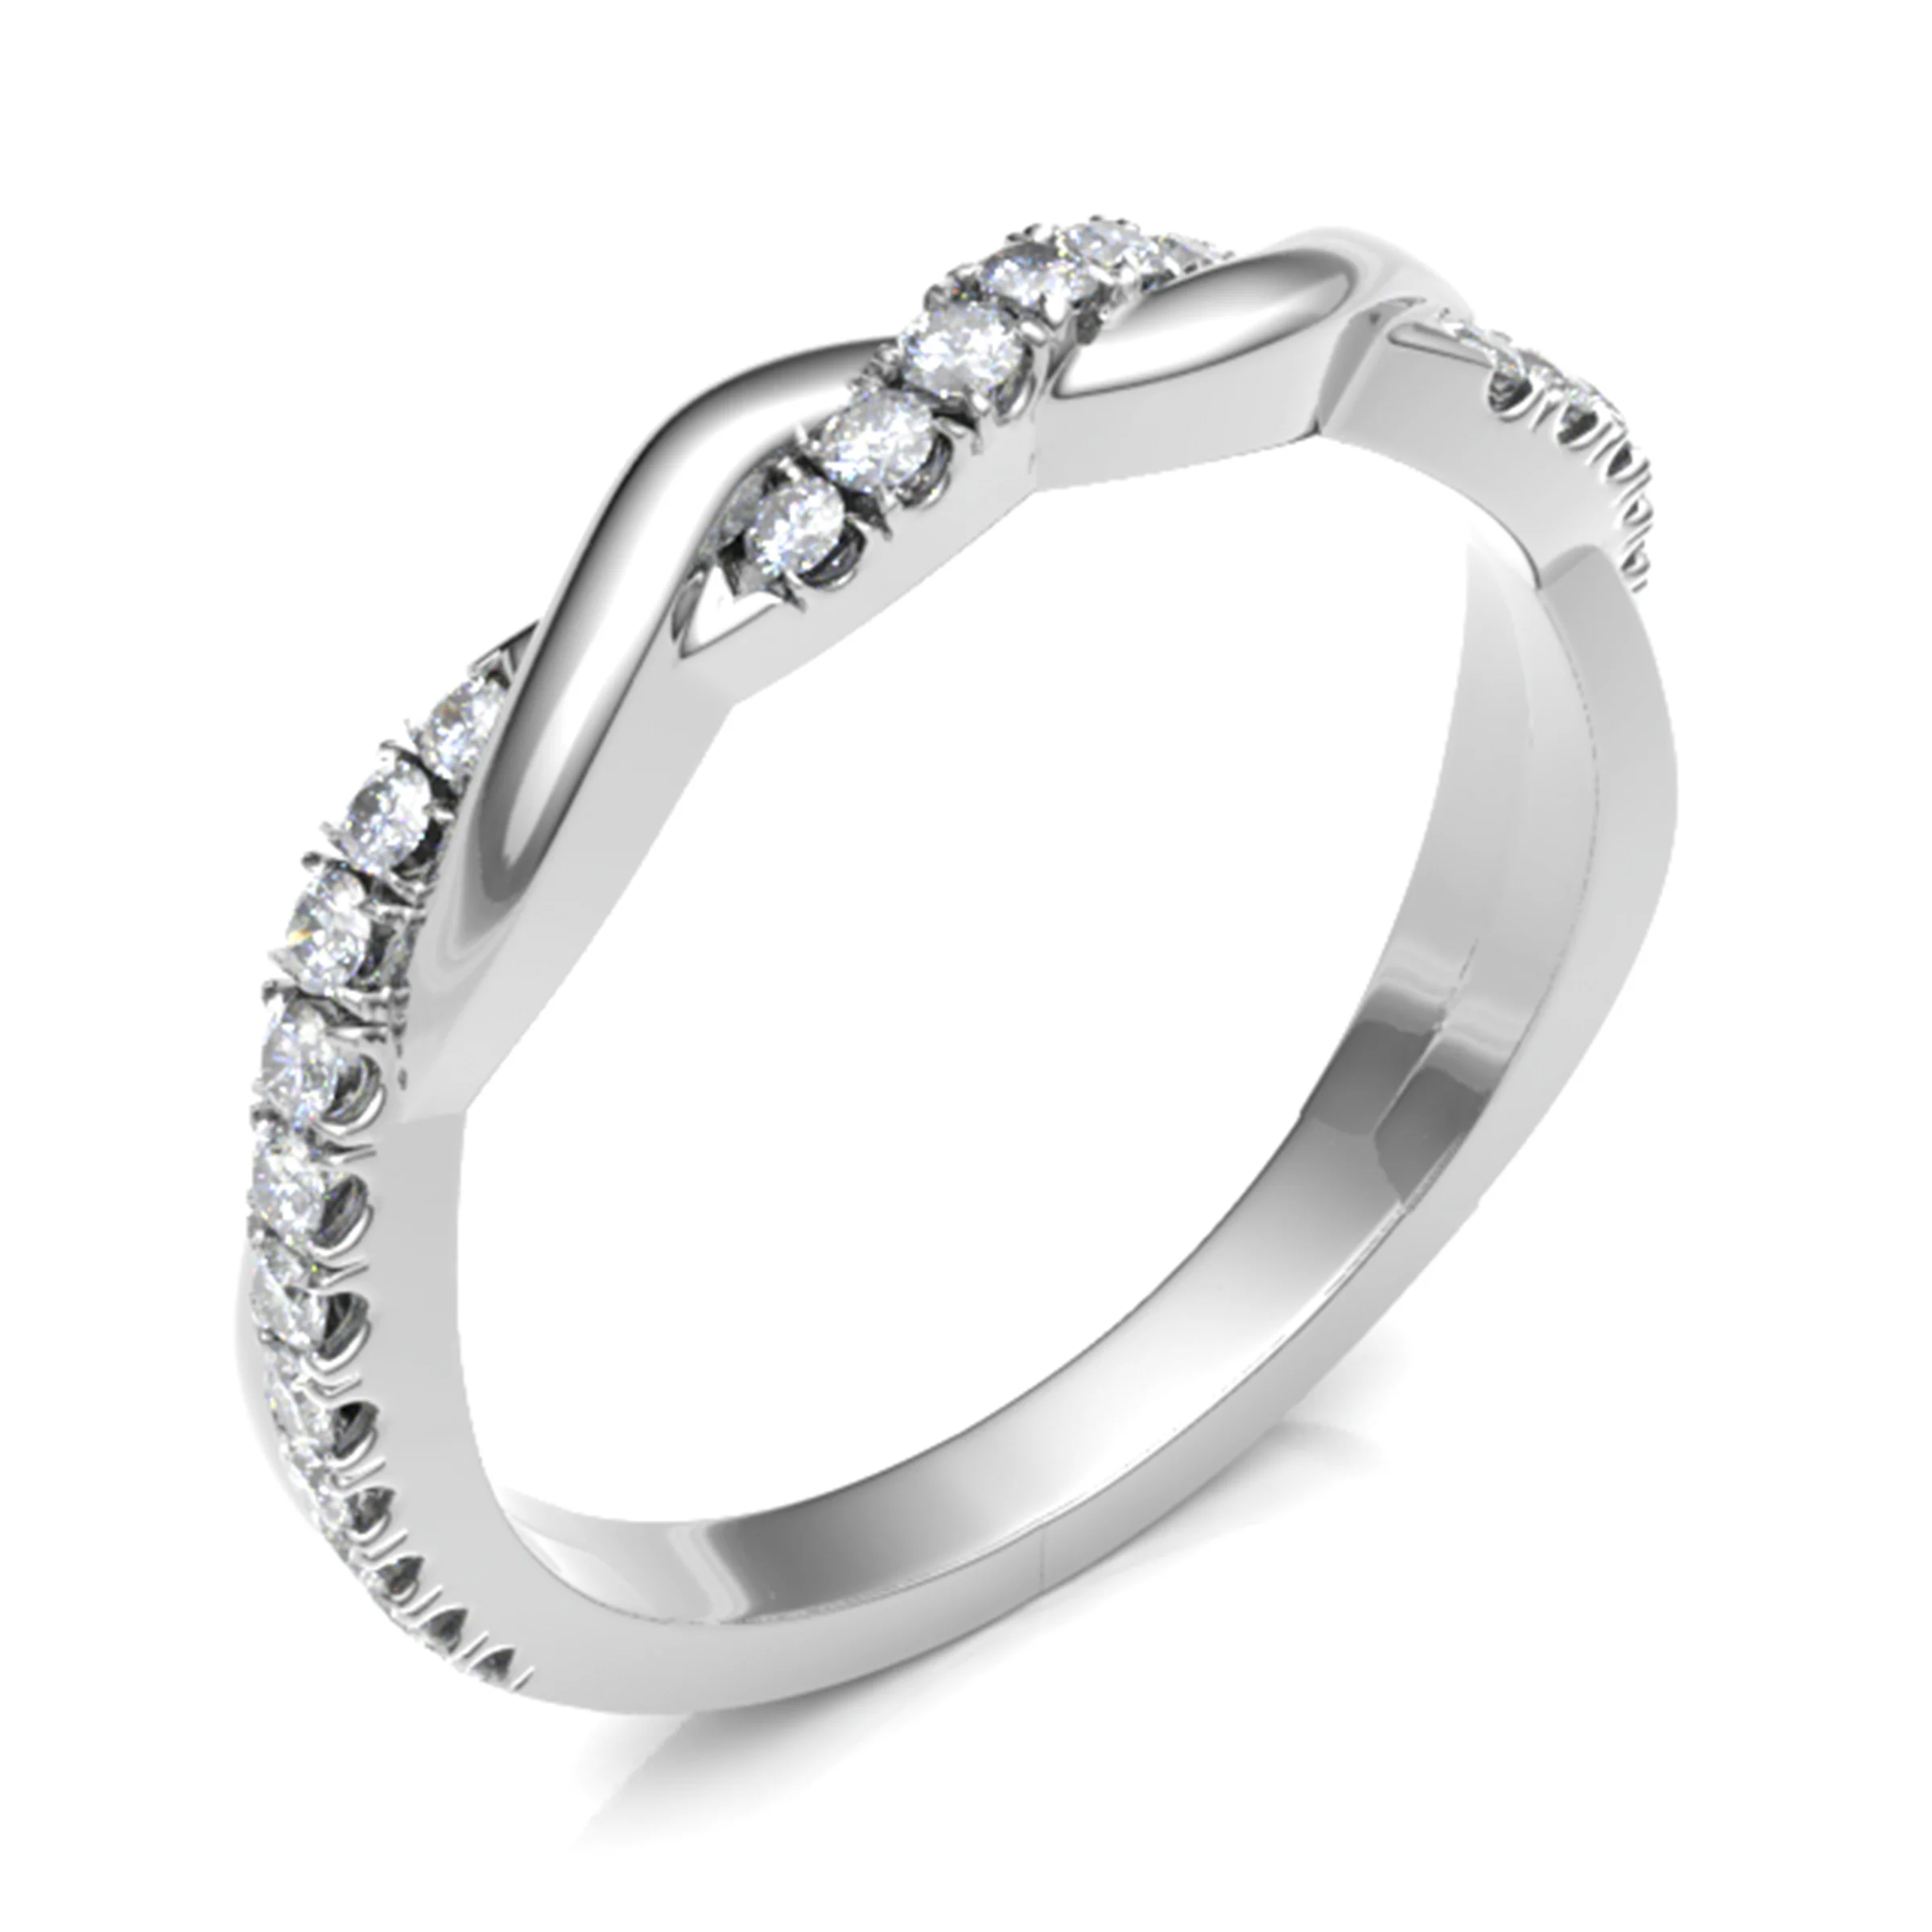 0.20 Carat Round Diamonds Twisted Half Eternity Ring with Micro Claw Set